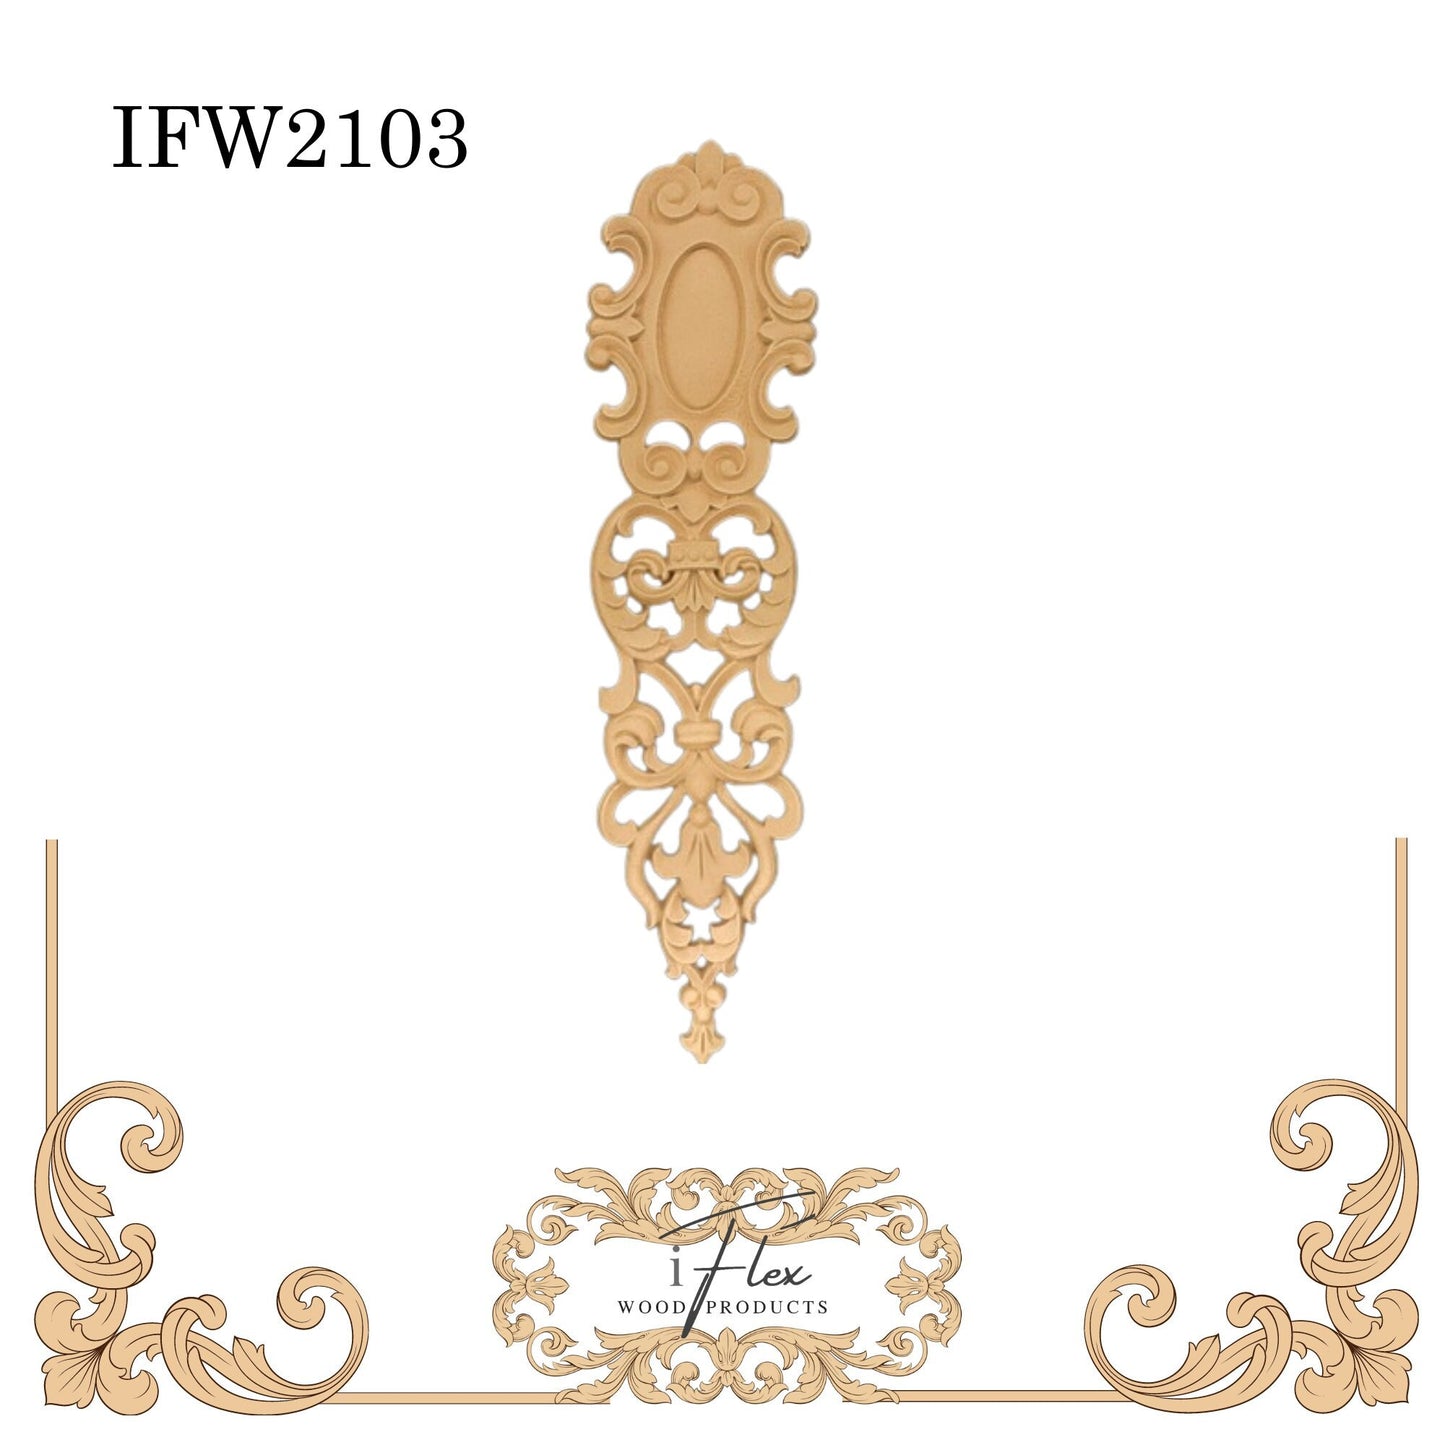 IFW 2103 iFlex Wood Products, bendable mouldings, flexible, wooden appliques, drop